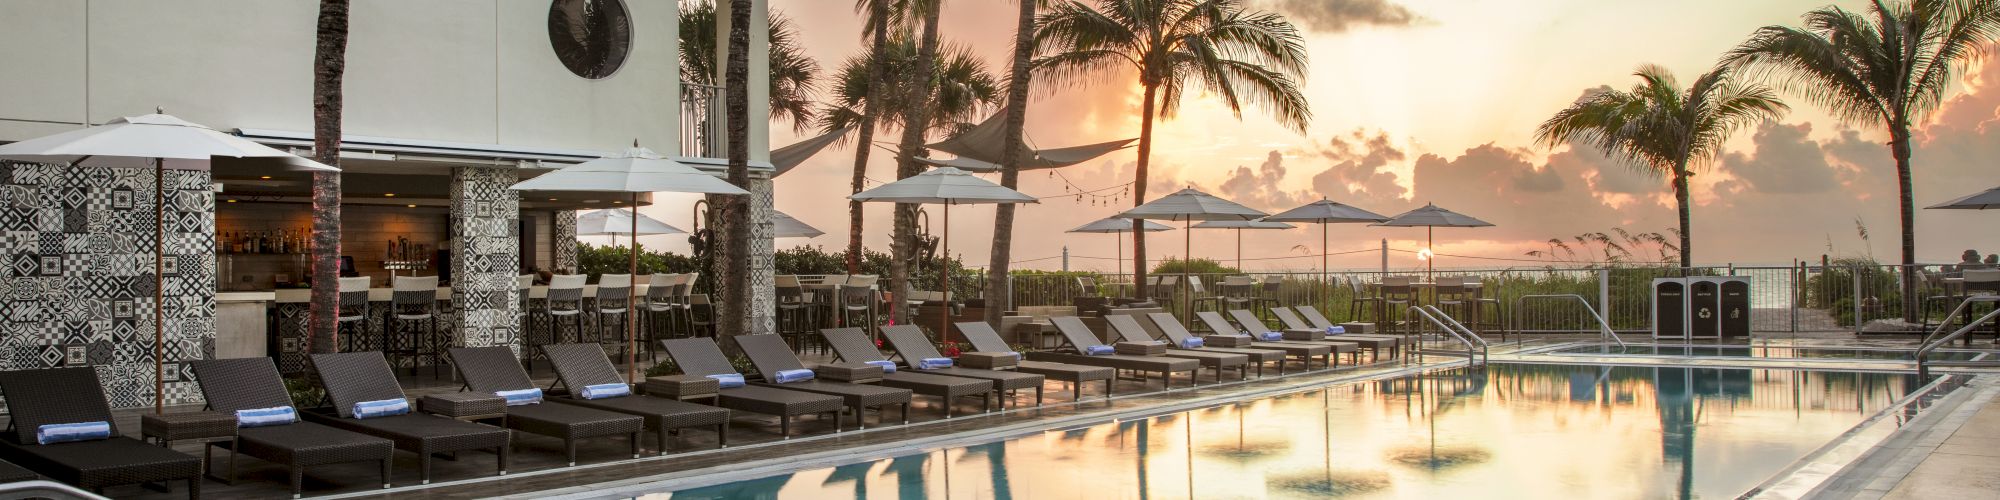 A tranquil outdoor pool area with lounge chairs, umbrellas, and palm trees at sunset; a perfect spot for relaxation and enjoyment.